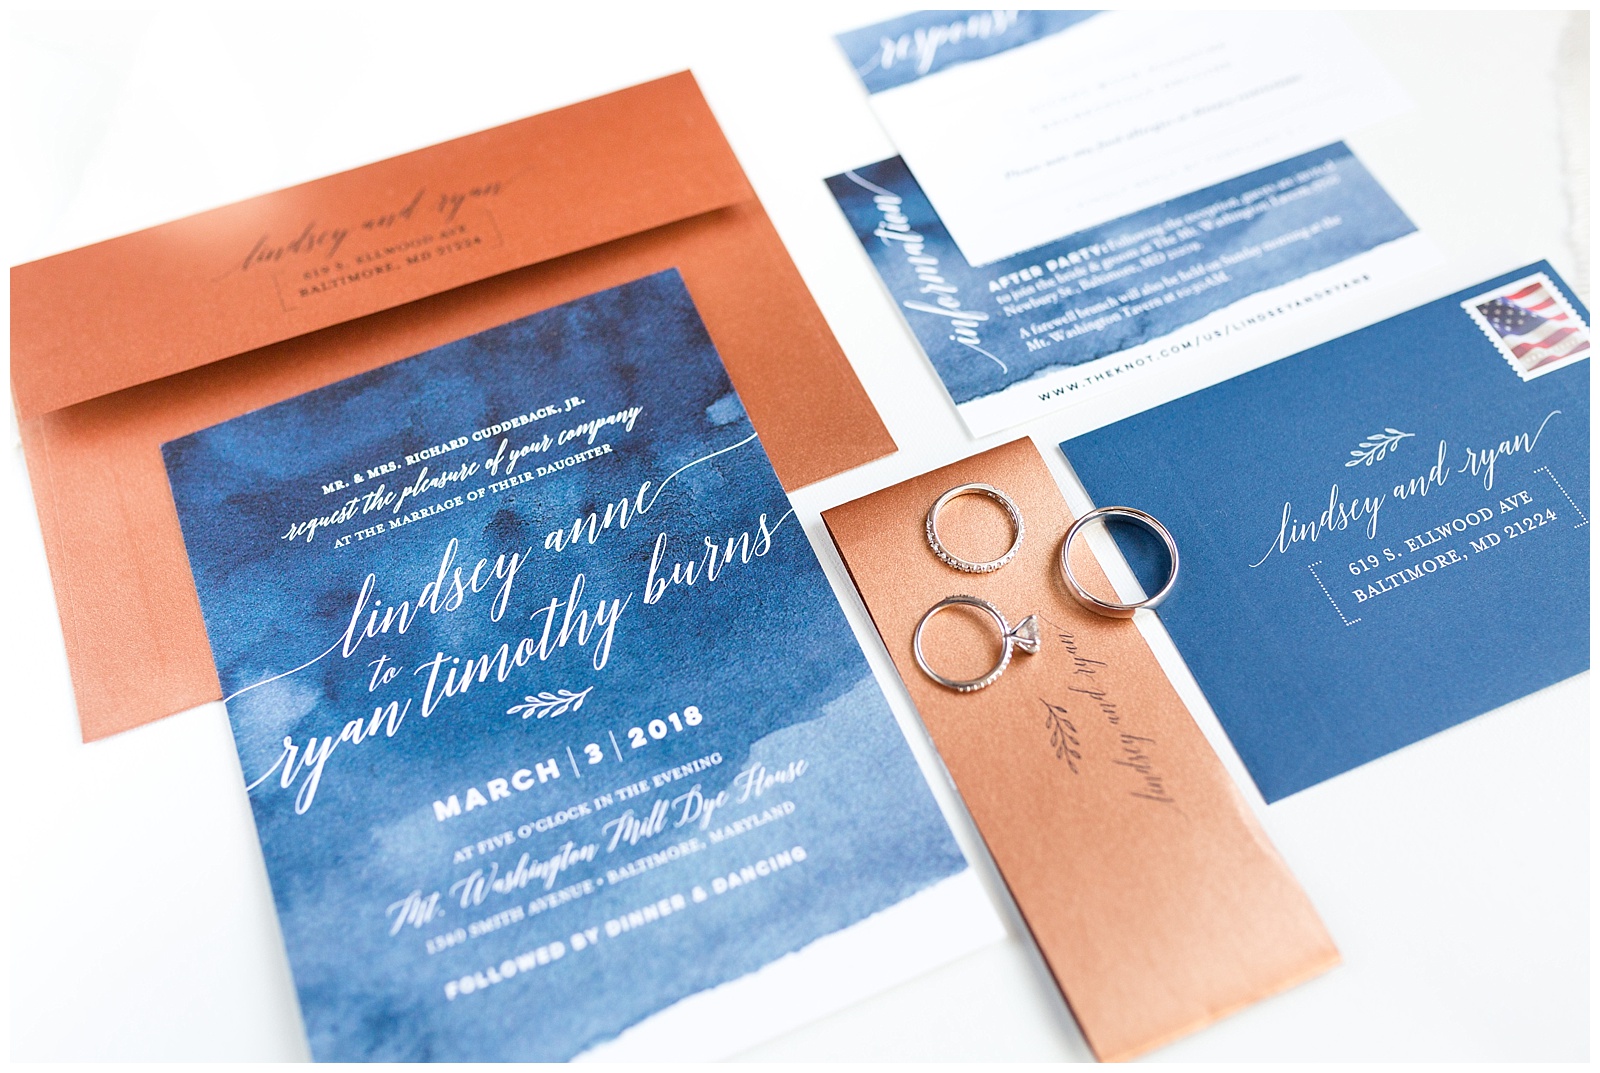 baltimore/wedding/photographer/hannah/mink/photography/invitation/suite/copper/blue/navy/watercolor/stationary/calligraphy/tomahawk/design/graphic